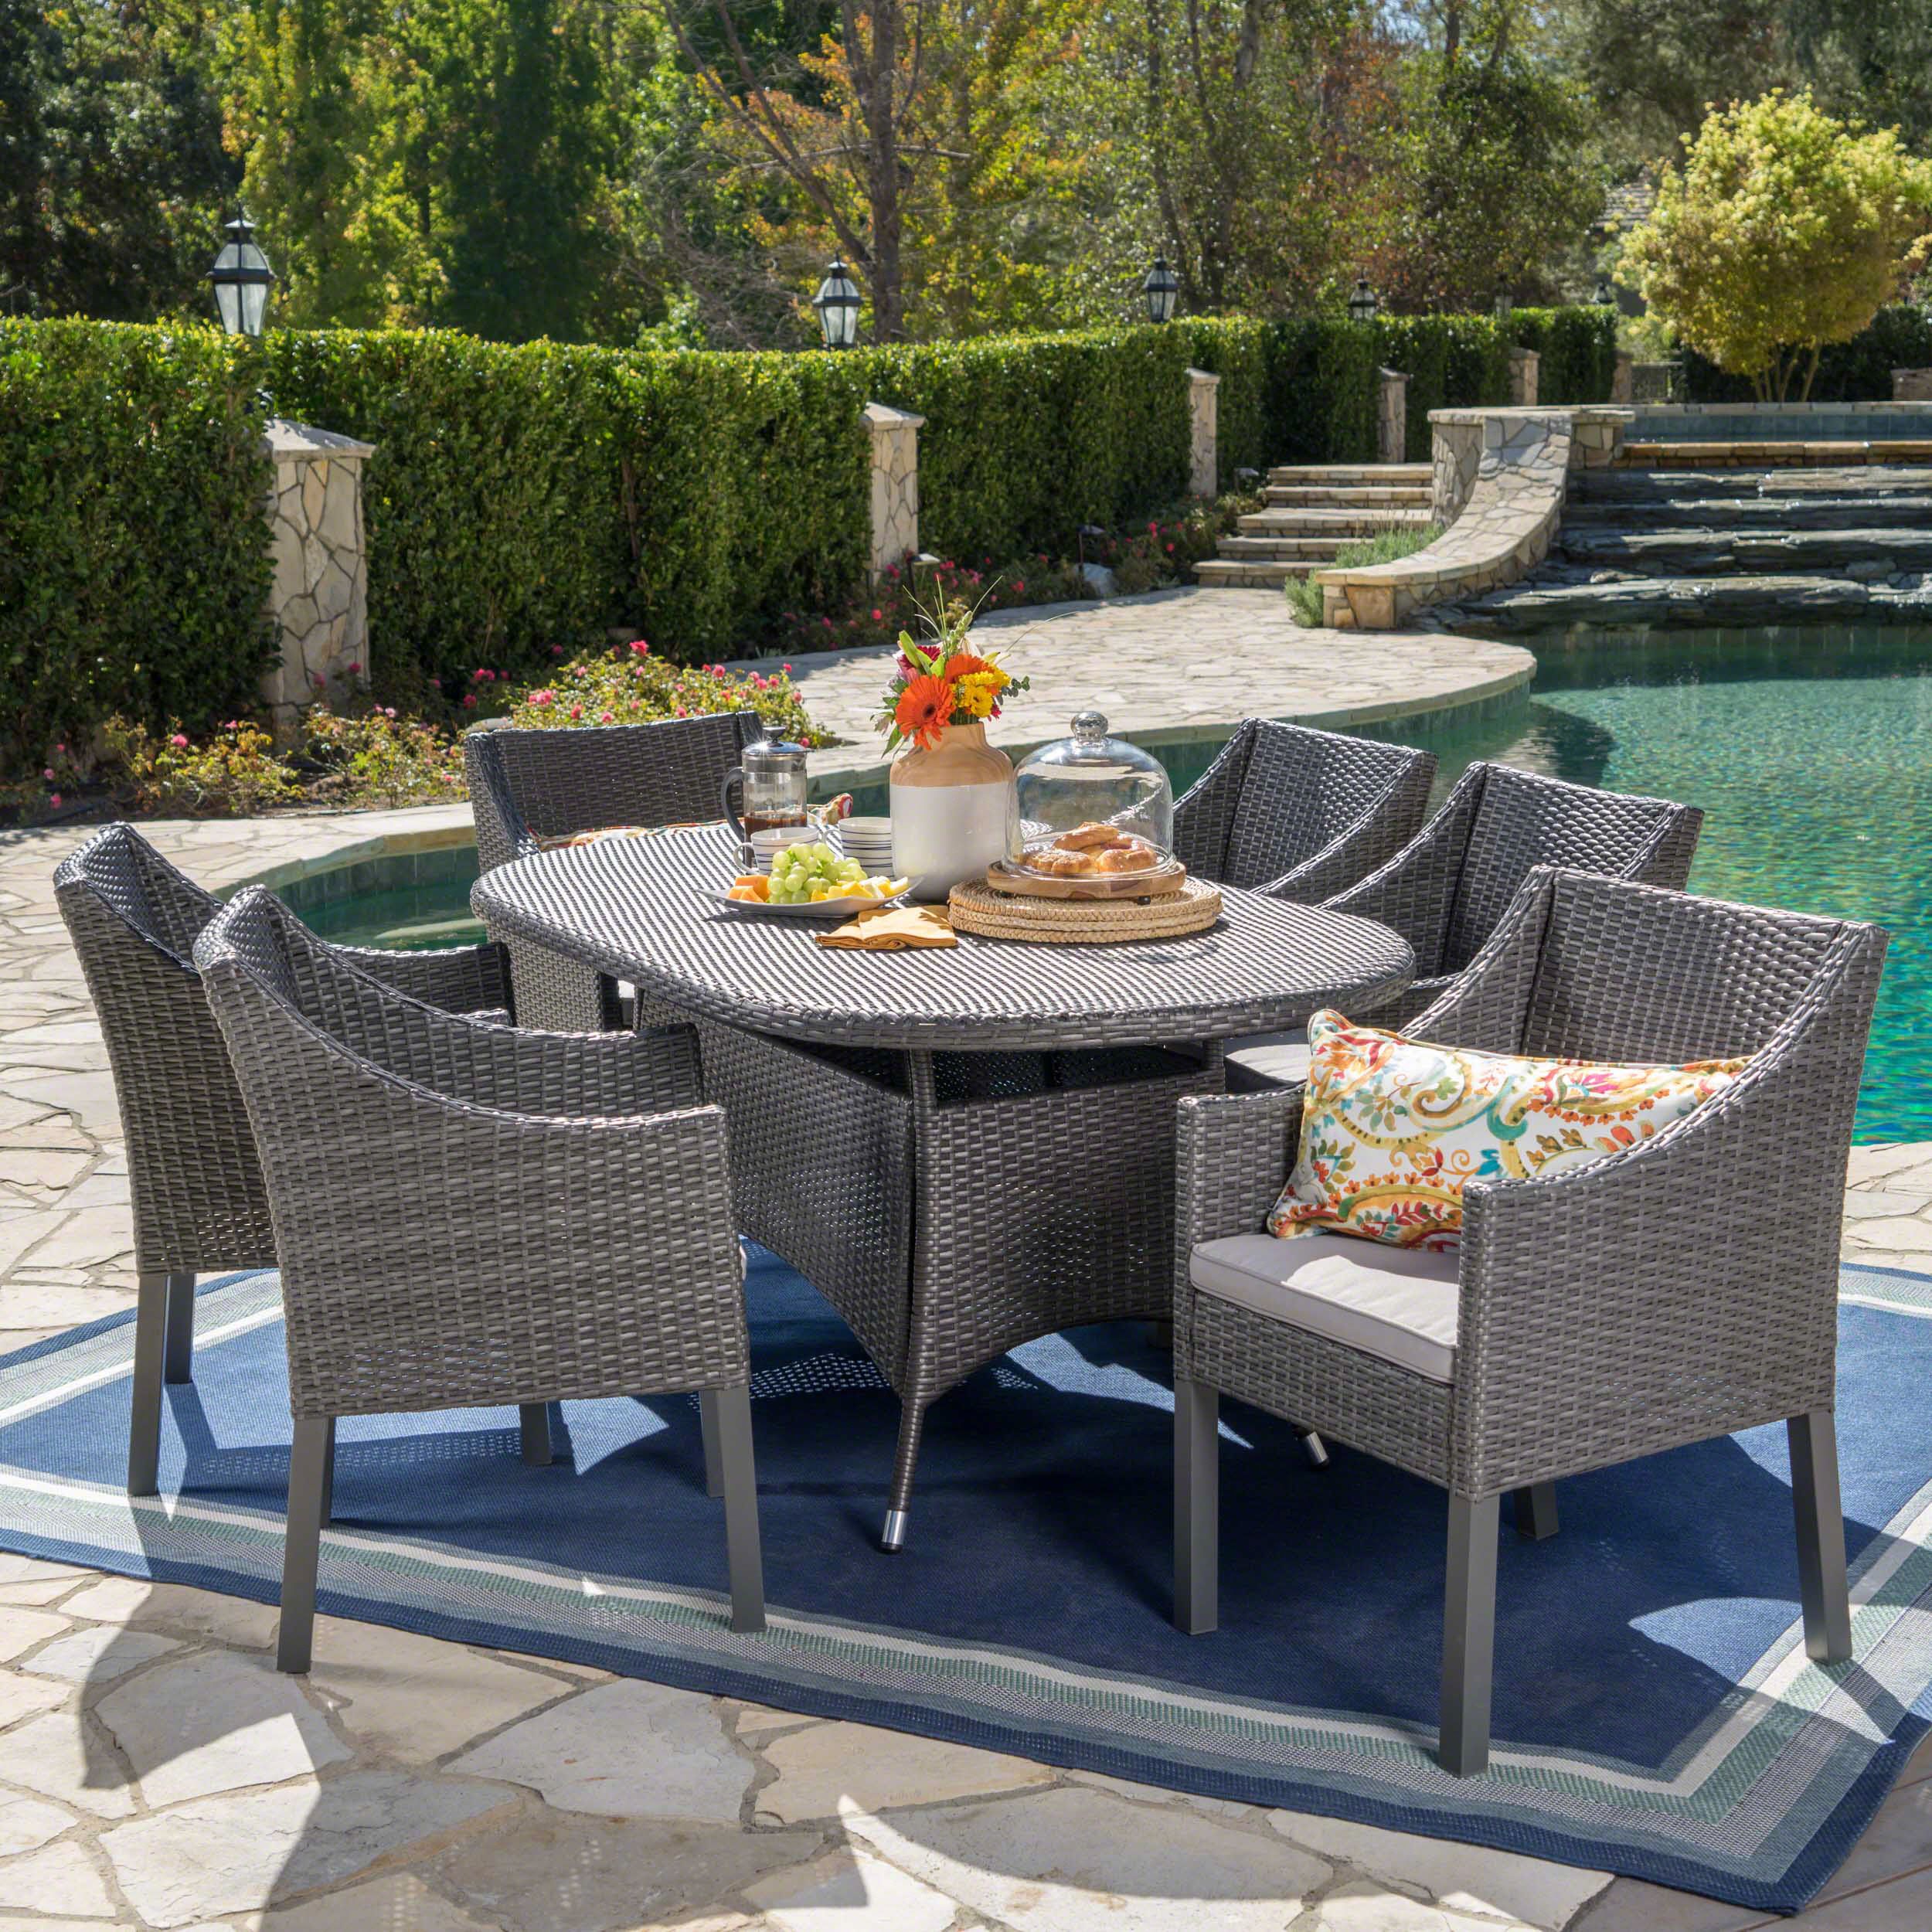 Leo Outdoor 7 Piece Wicker Oval Dining Set With Cushions, Grey, Silver In Outdoor Wicker Gray Cushion Patio Sets (View 12 of 15)